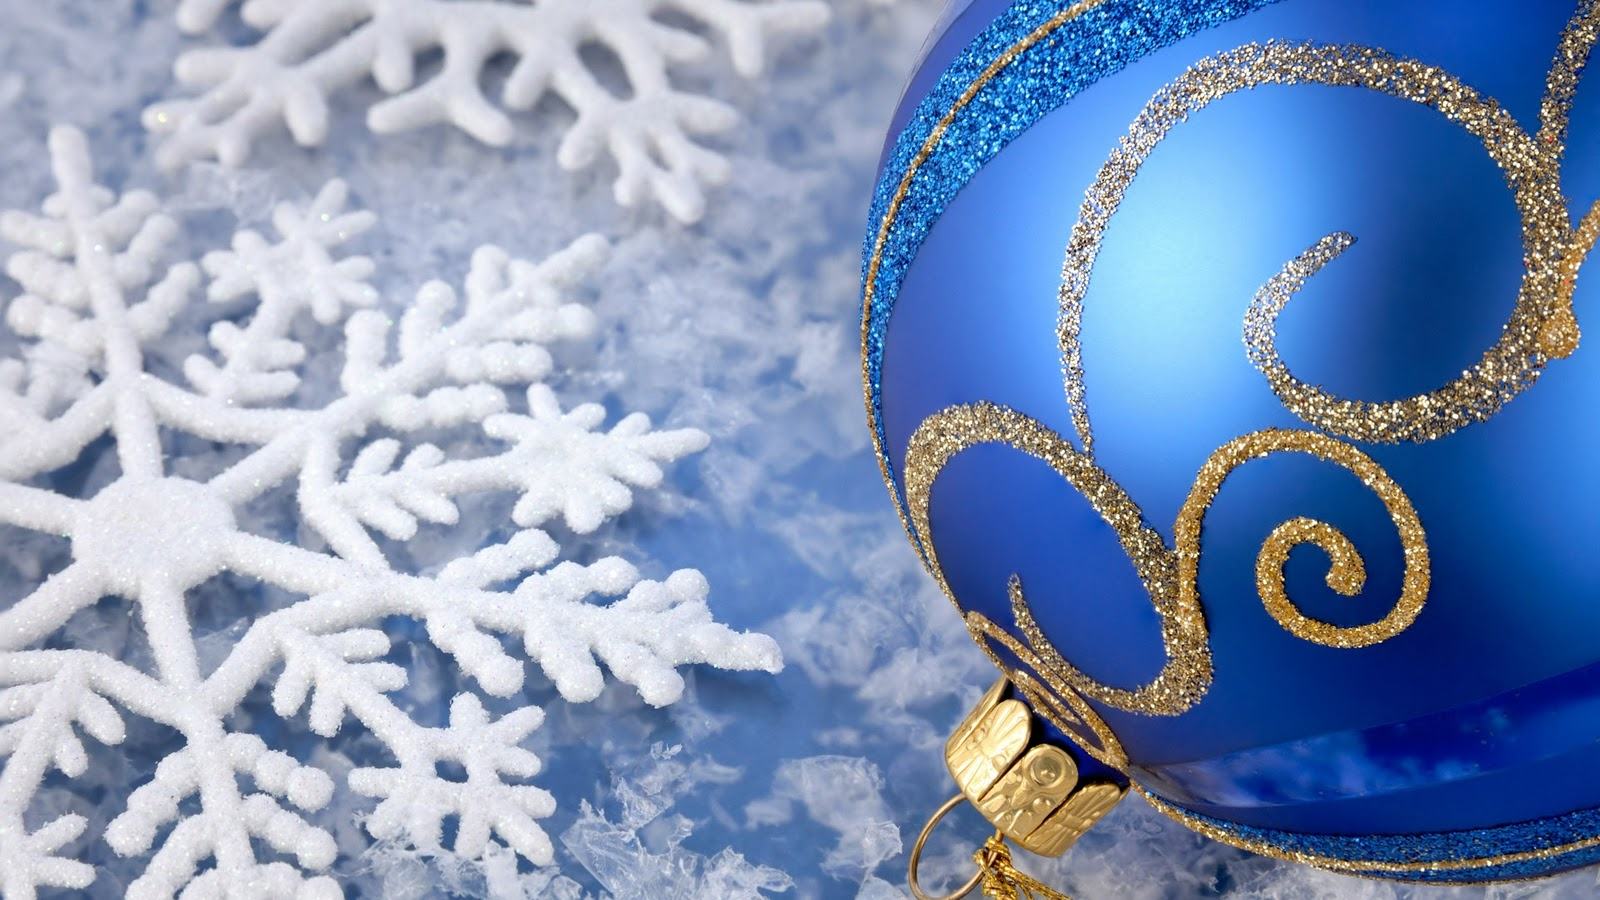 Christmas desktop background - wallpapers, images, photos, pictures